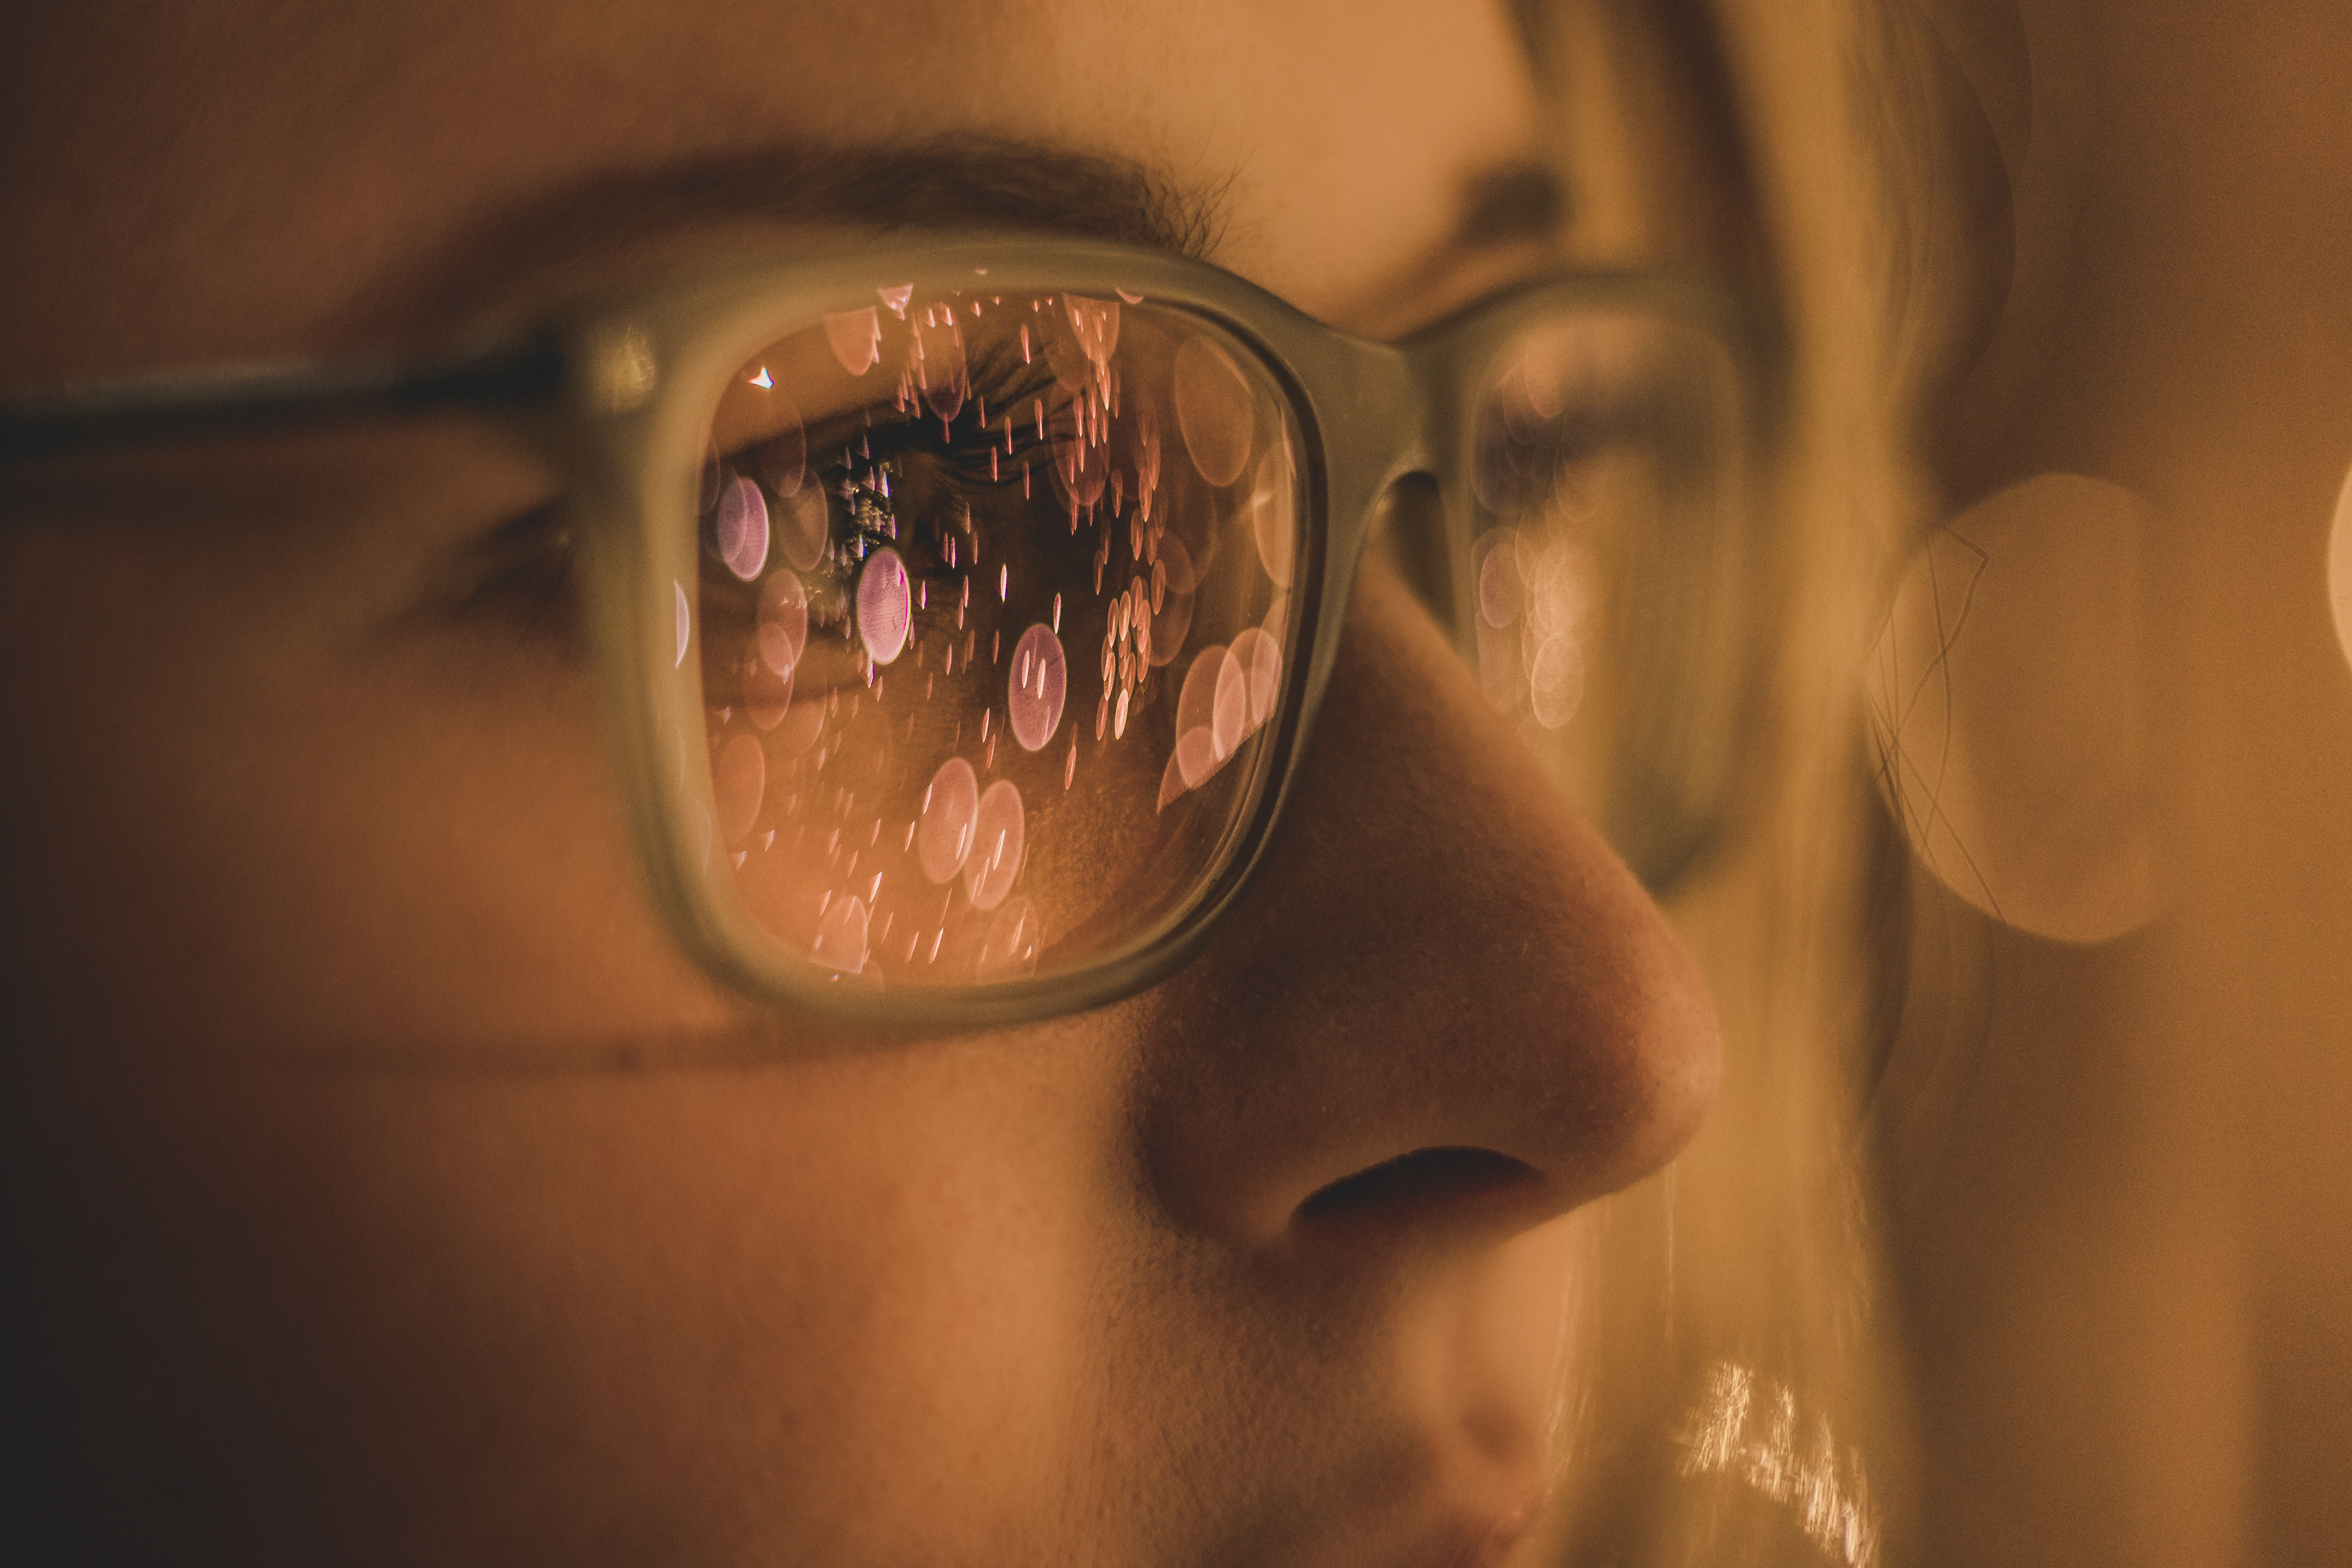 Looking at empowered women through voyeur-tinted glasses